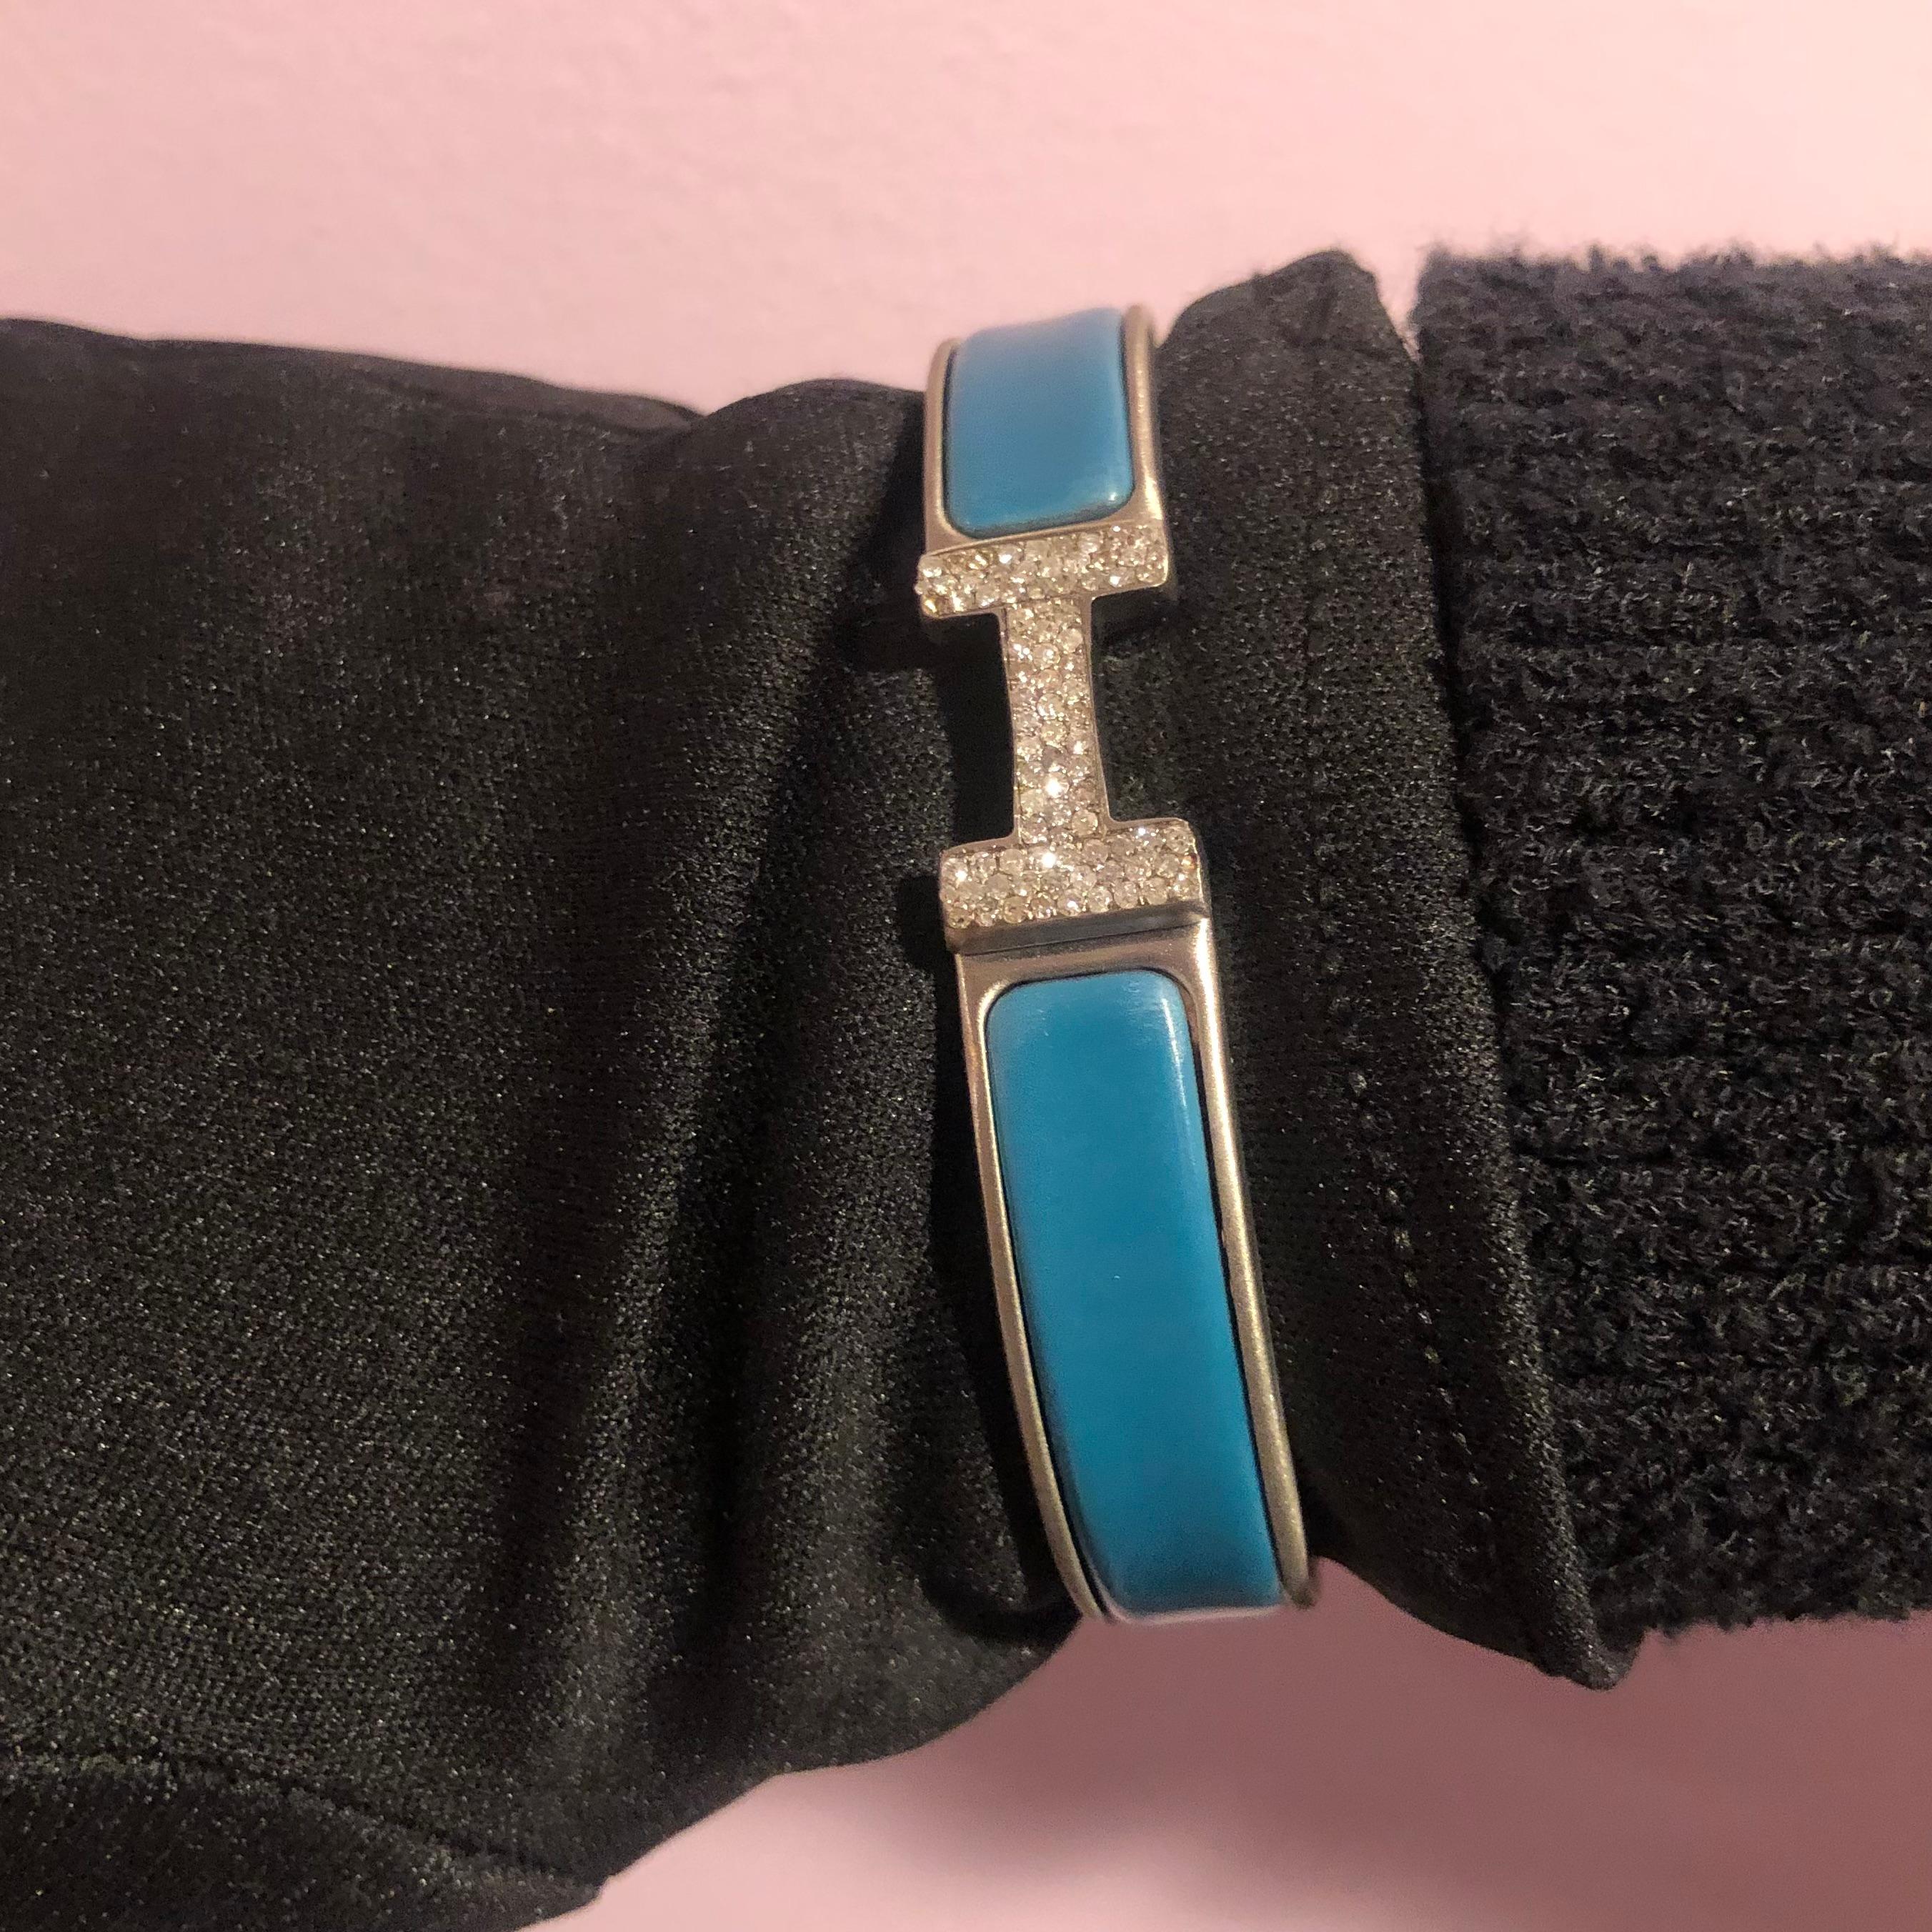 Custom Diamond Hermes Clic H Bracelet complete with original box. 

An original Hermes Clic H bracelet GM size in Blue and Silver color is customized hand-set with approx. 1.25 carats of natural genuine earth-mined SI-I Diamonds. The diamonds shine